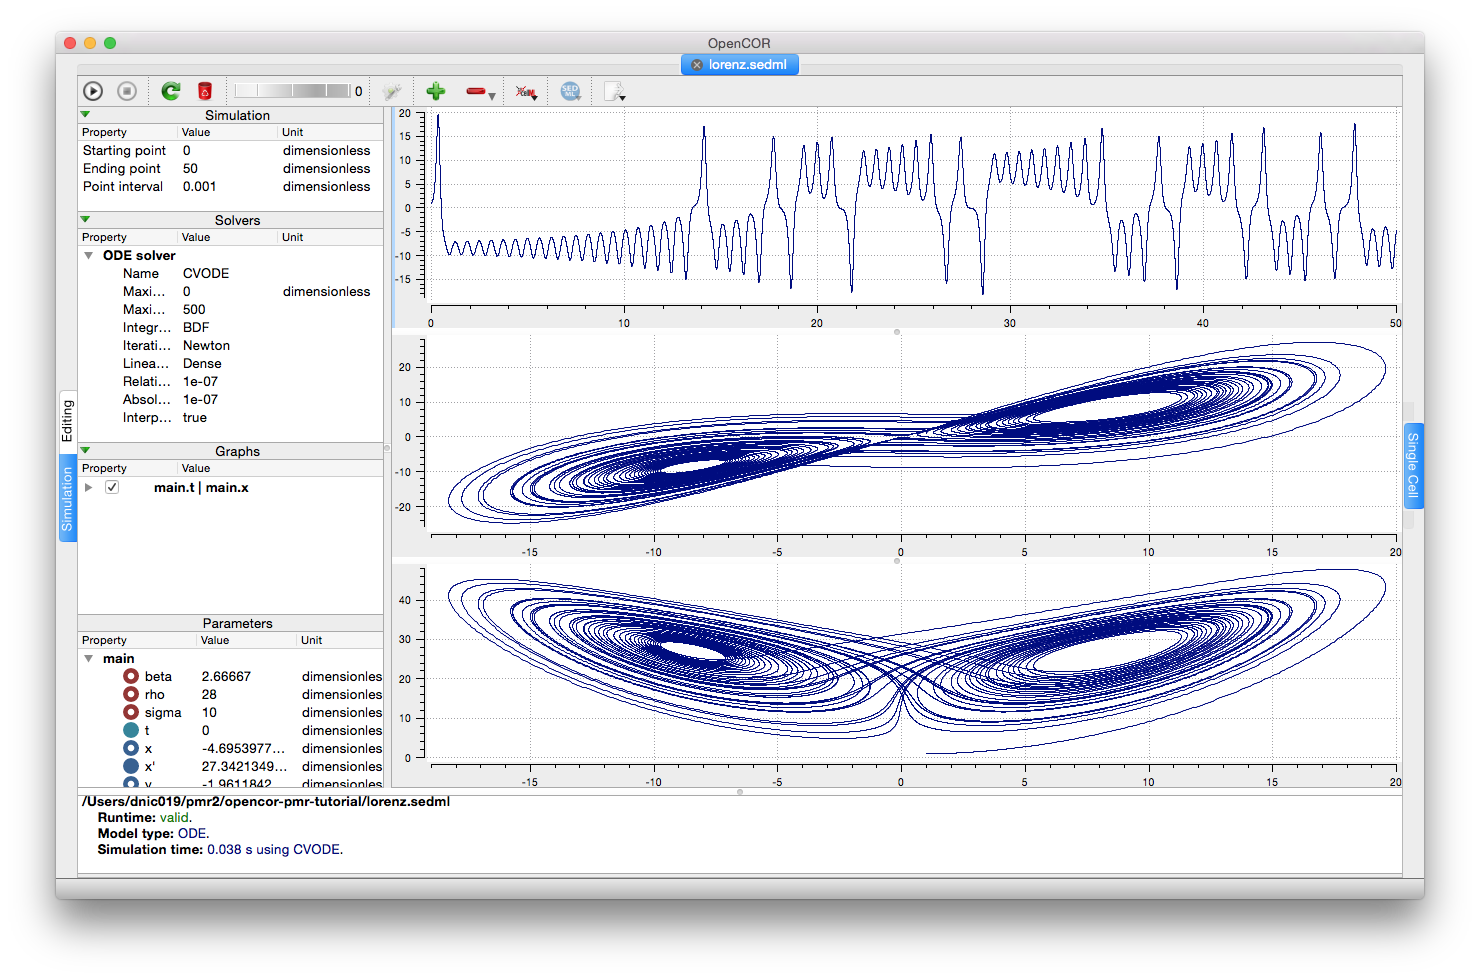 Screenshot illustrating the results of executing the Lorenz attractor simulation experiment in OpenCOR.